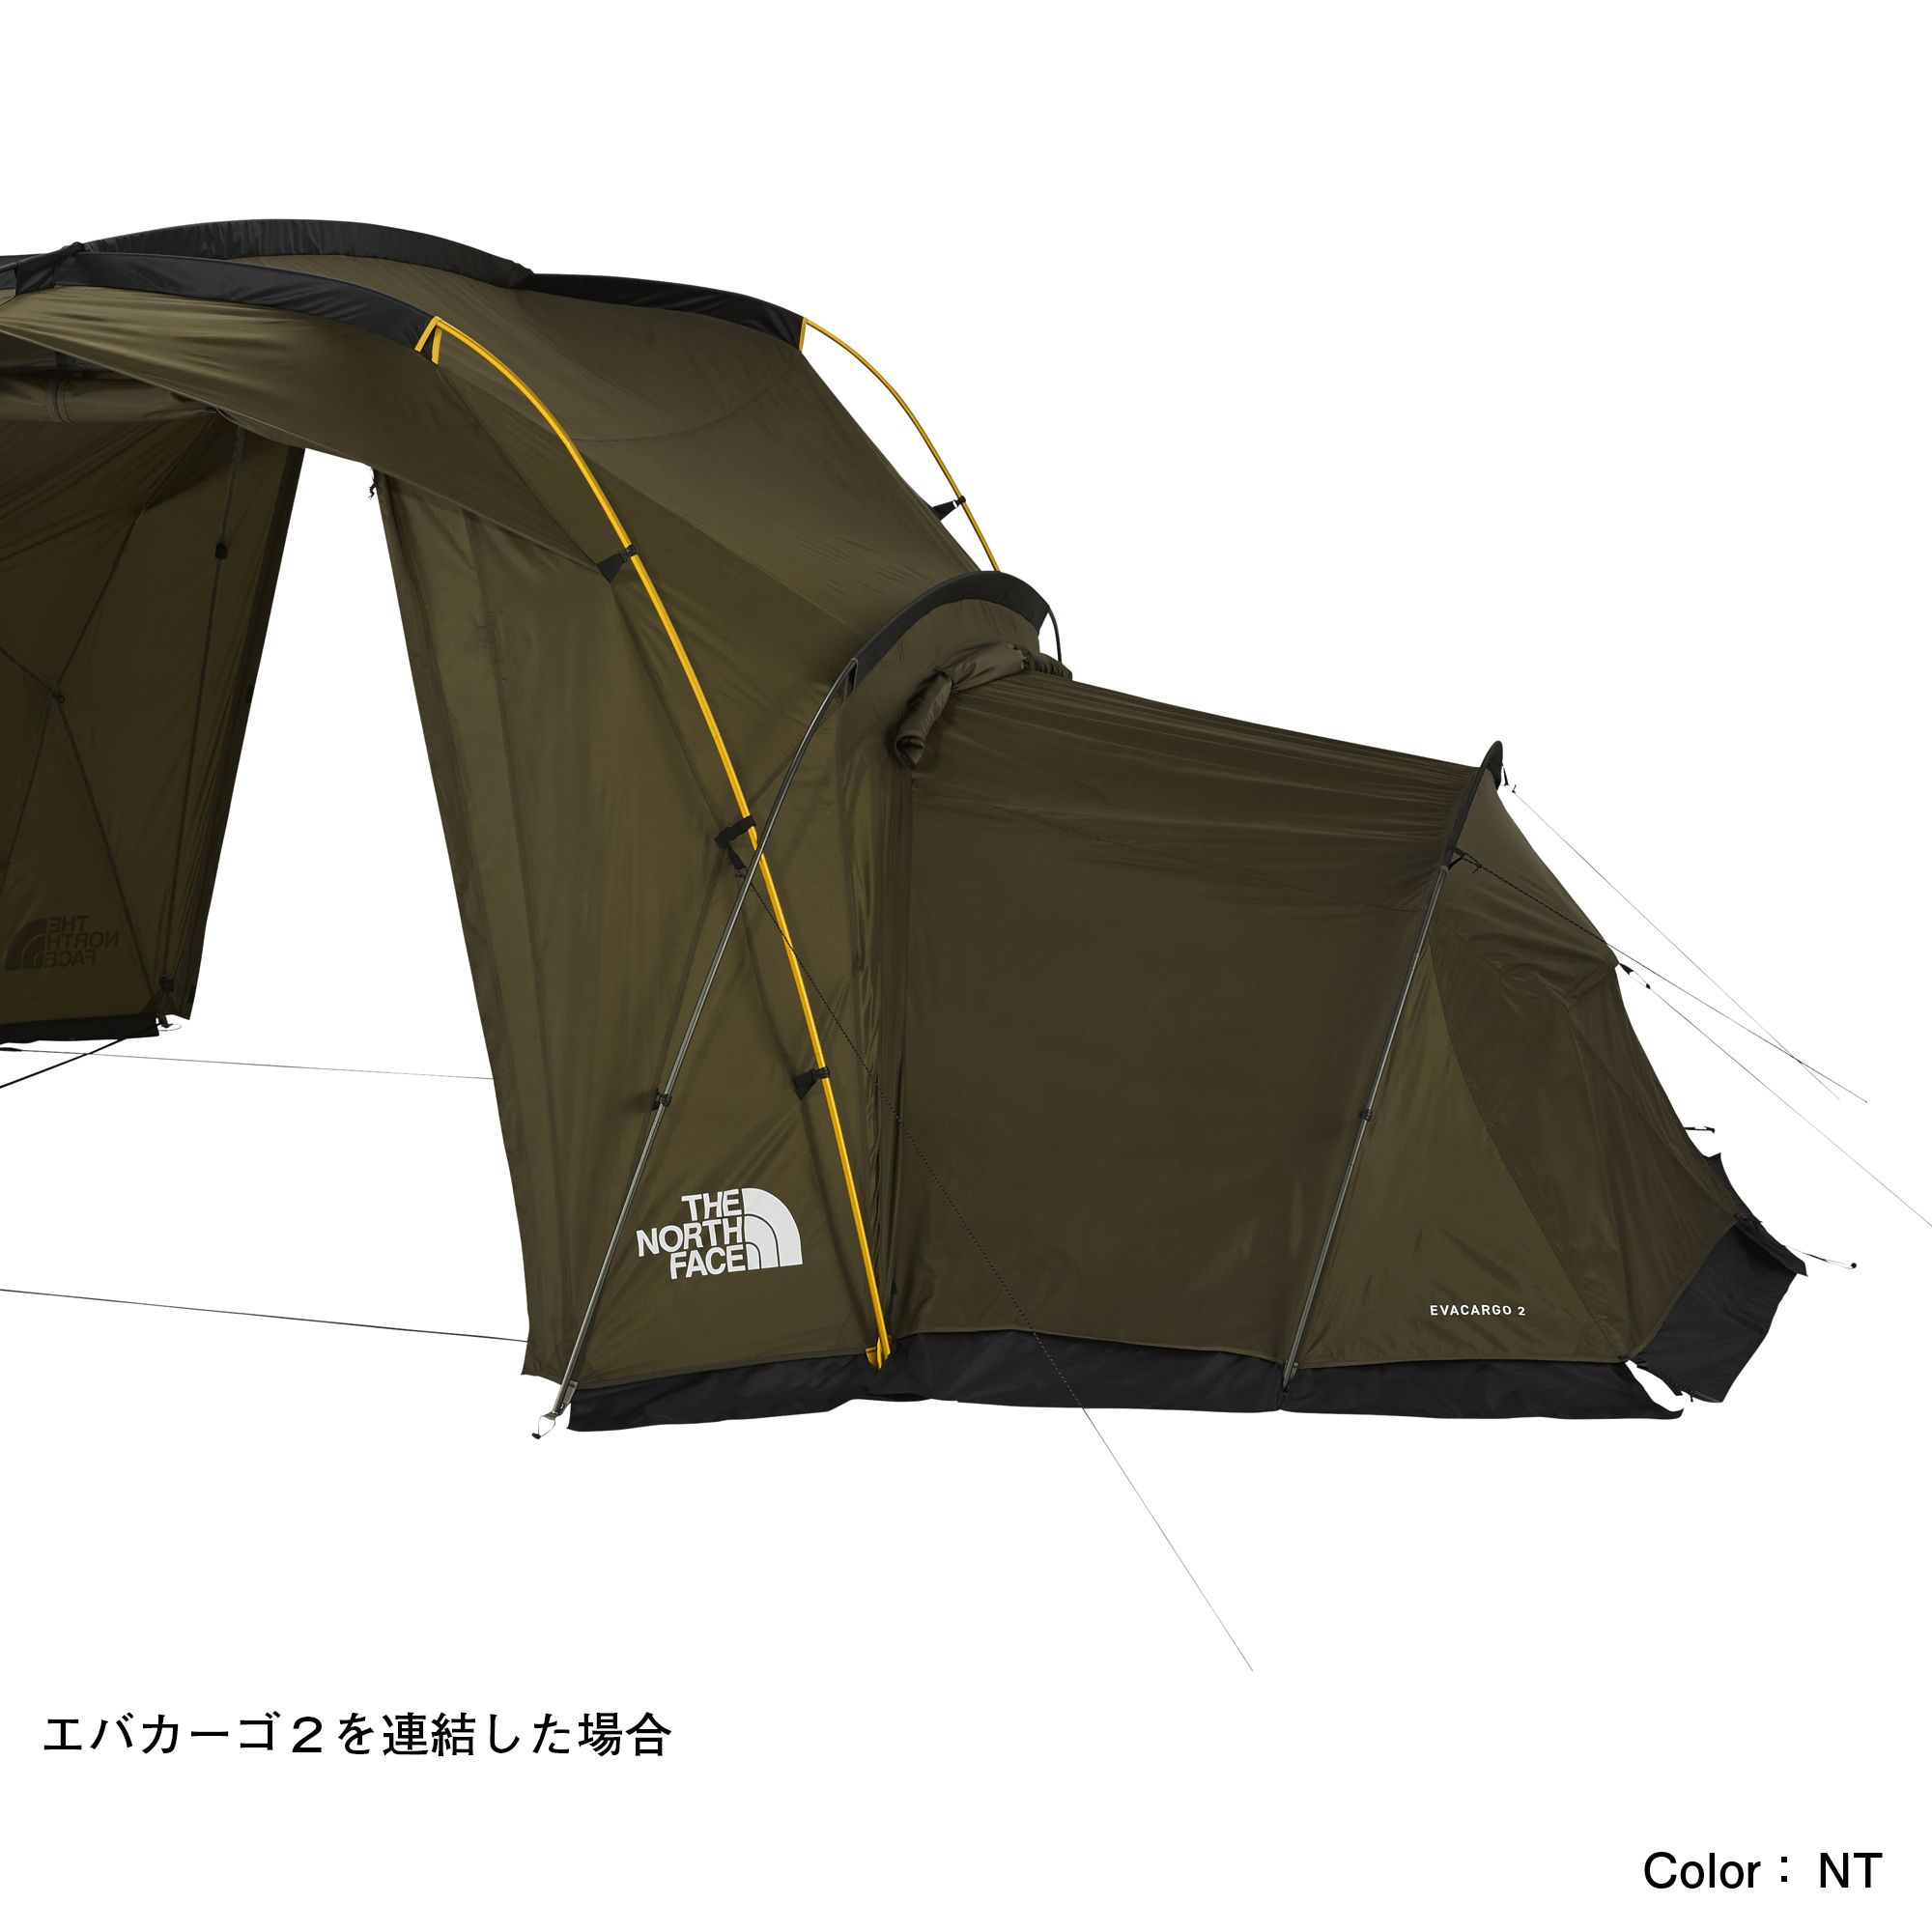 THE NORTH FACE - 新品ノースフェイス エバベース6 evabase6 THE NORTH FACE 【コンビニ受取対応商品】